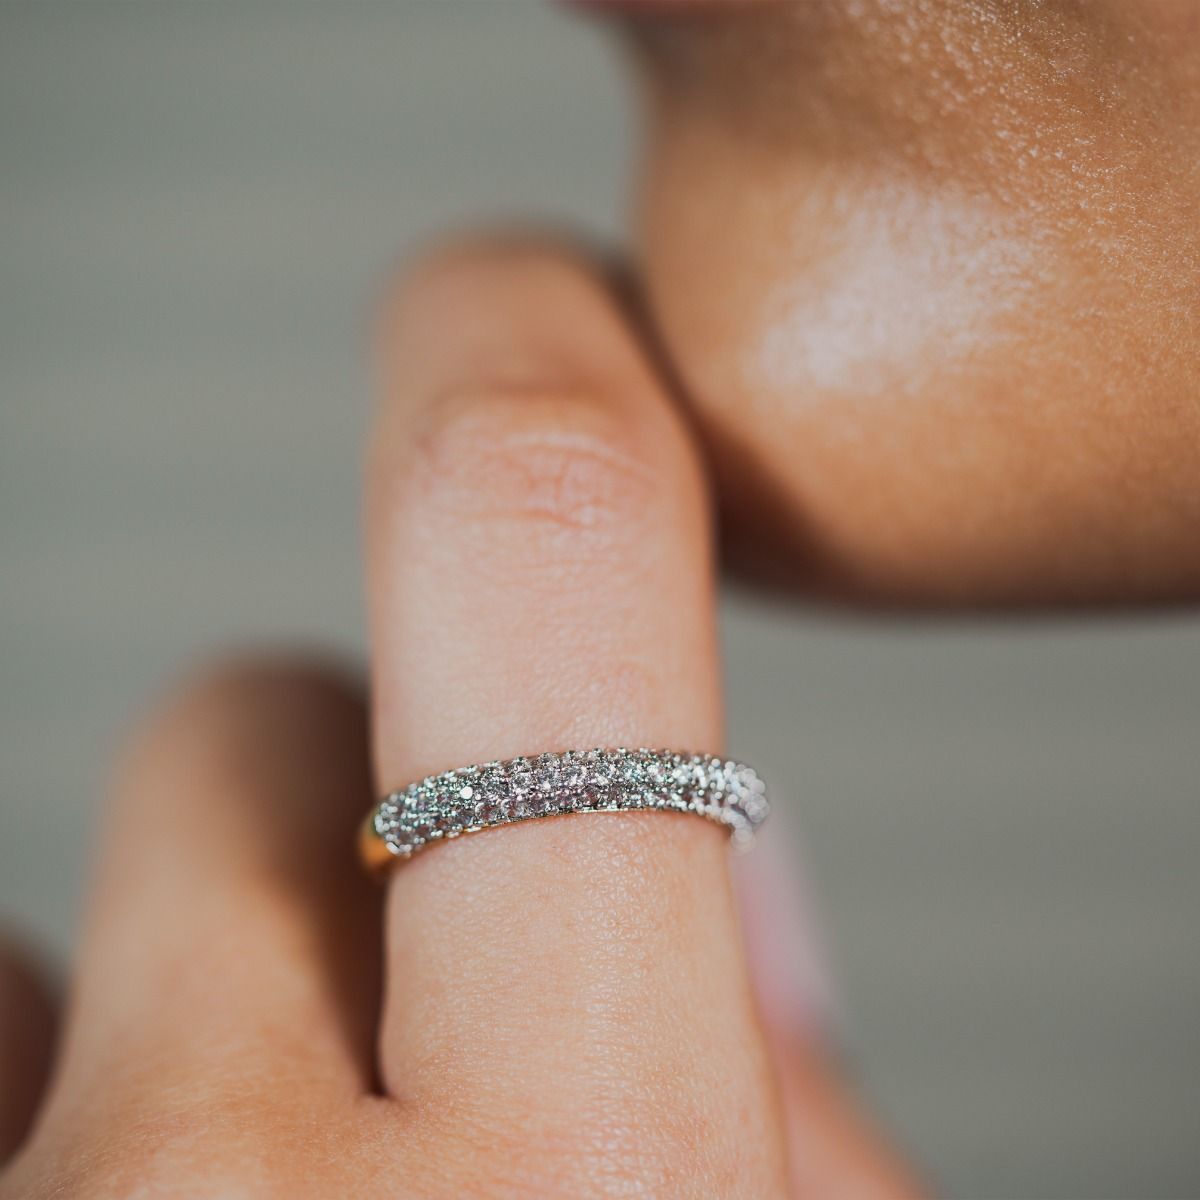 Elegance shines with our Two-Tone Pave Cluster Ring. A gleaming gold-polished band adorned with an array of cubic zirconia stones, creating a stunning, sophisticated look that captures attention. This ring merges classic design with modern sparkle for a t